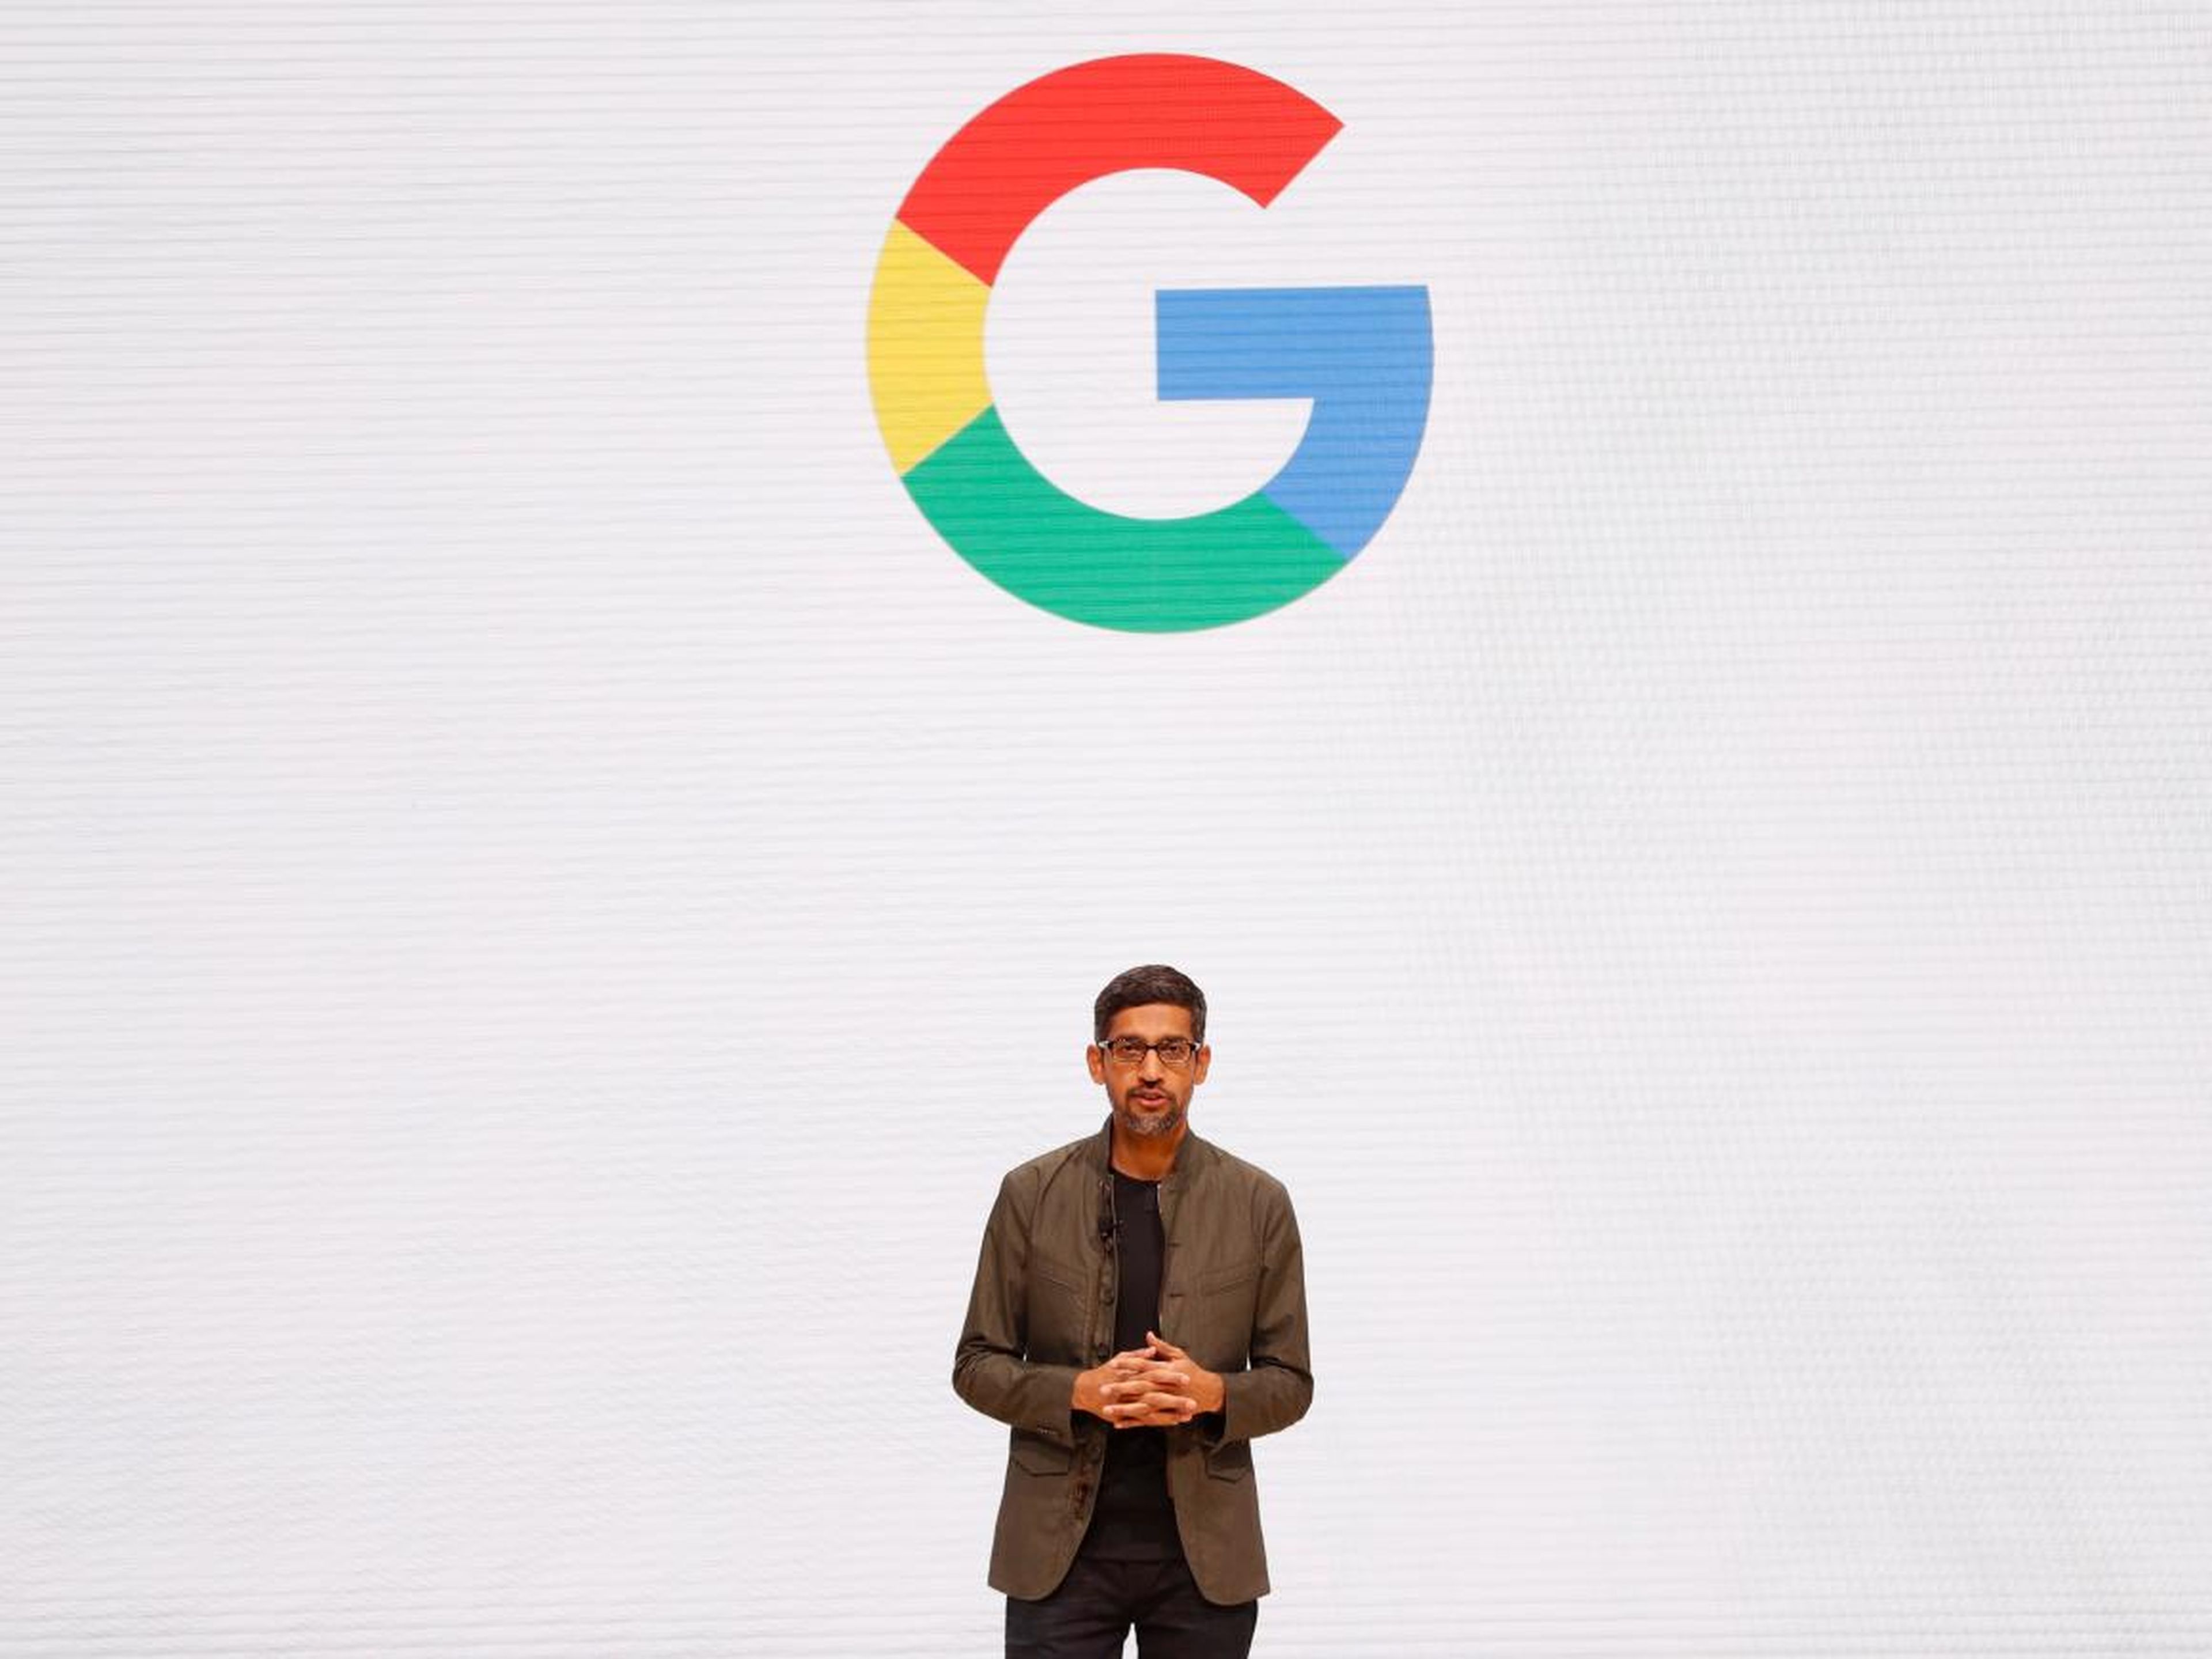 Google CEO Sundar Pichai speaks during the Google keynote address at the Game Developers Conference in San Francisco.